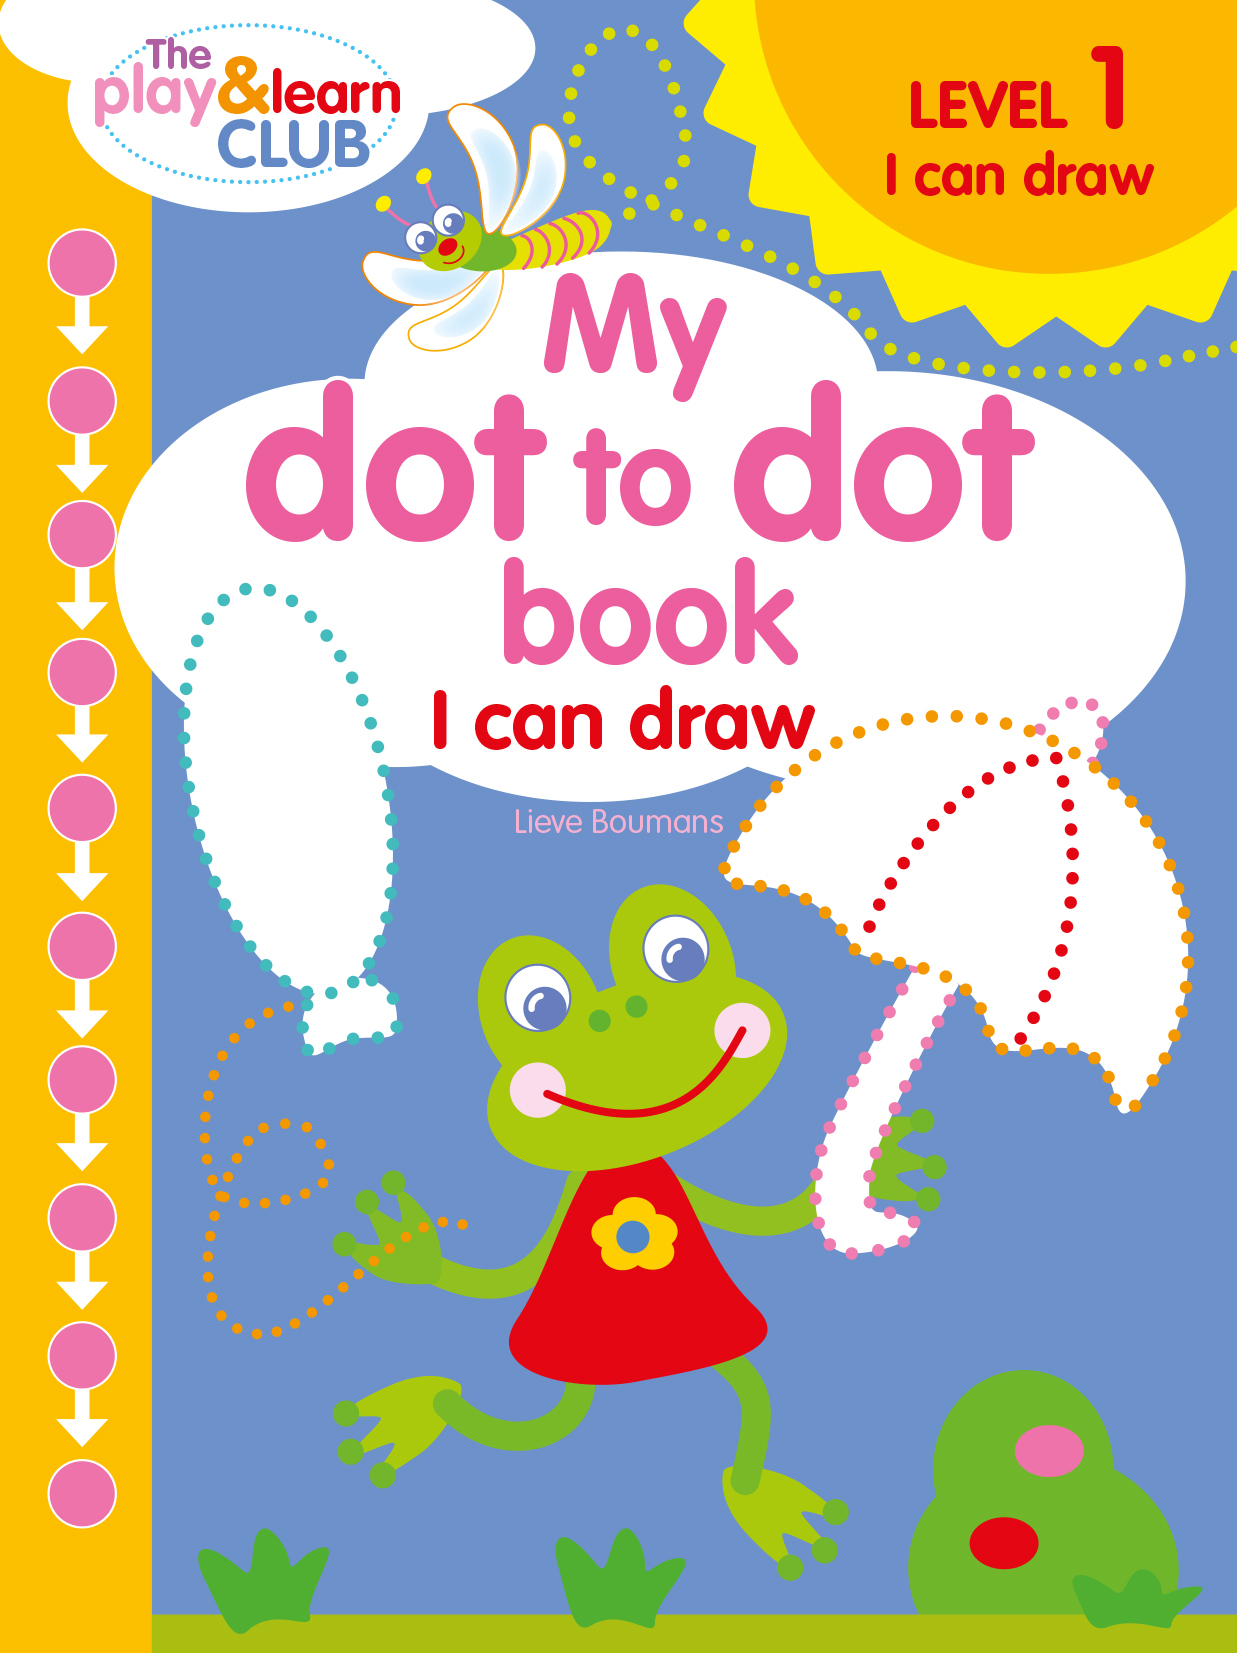 Play and Learn Club - dot to dot